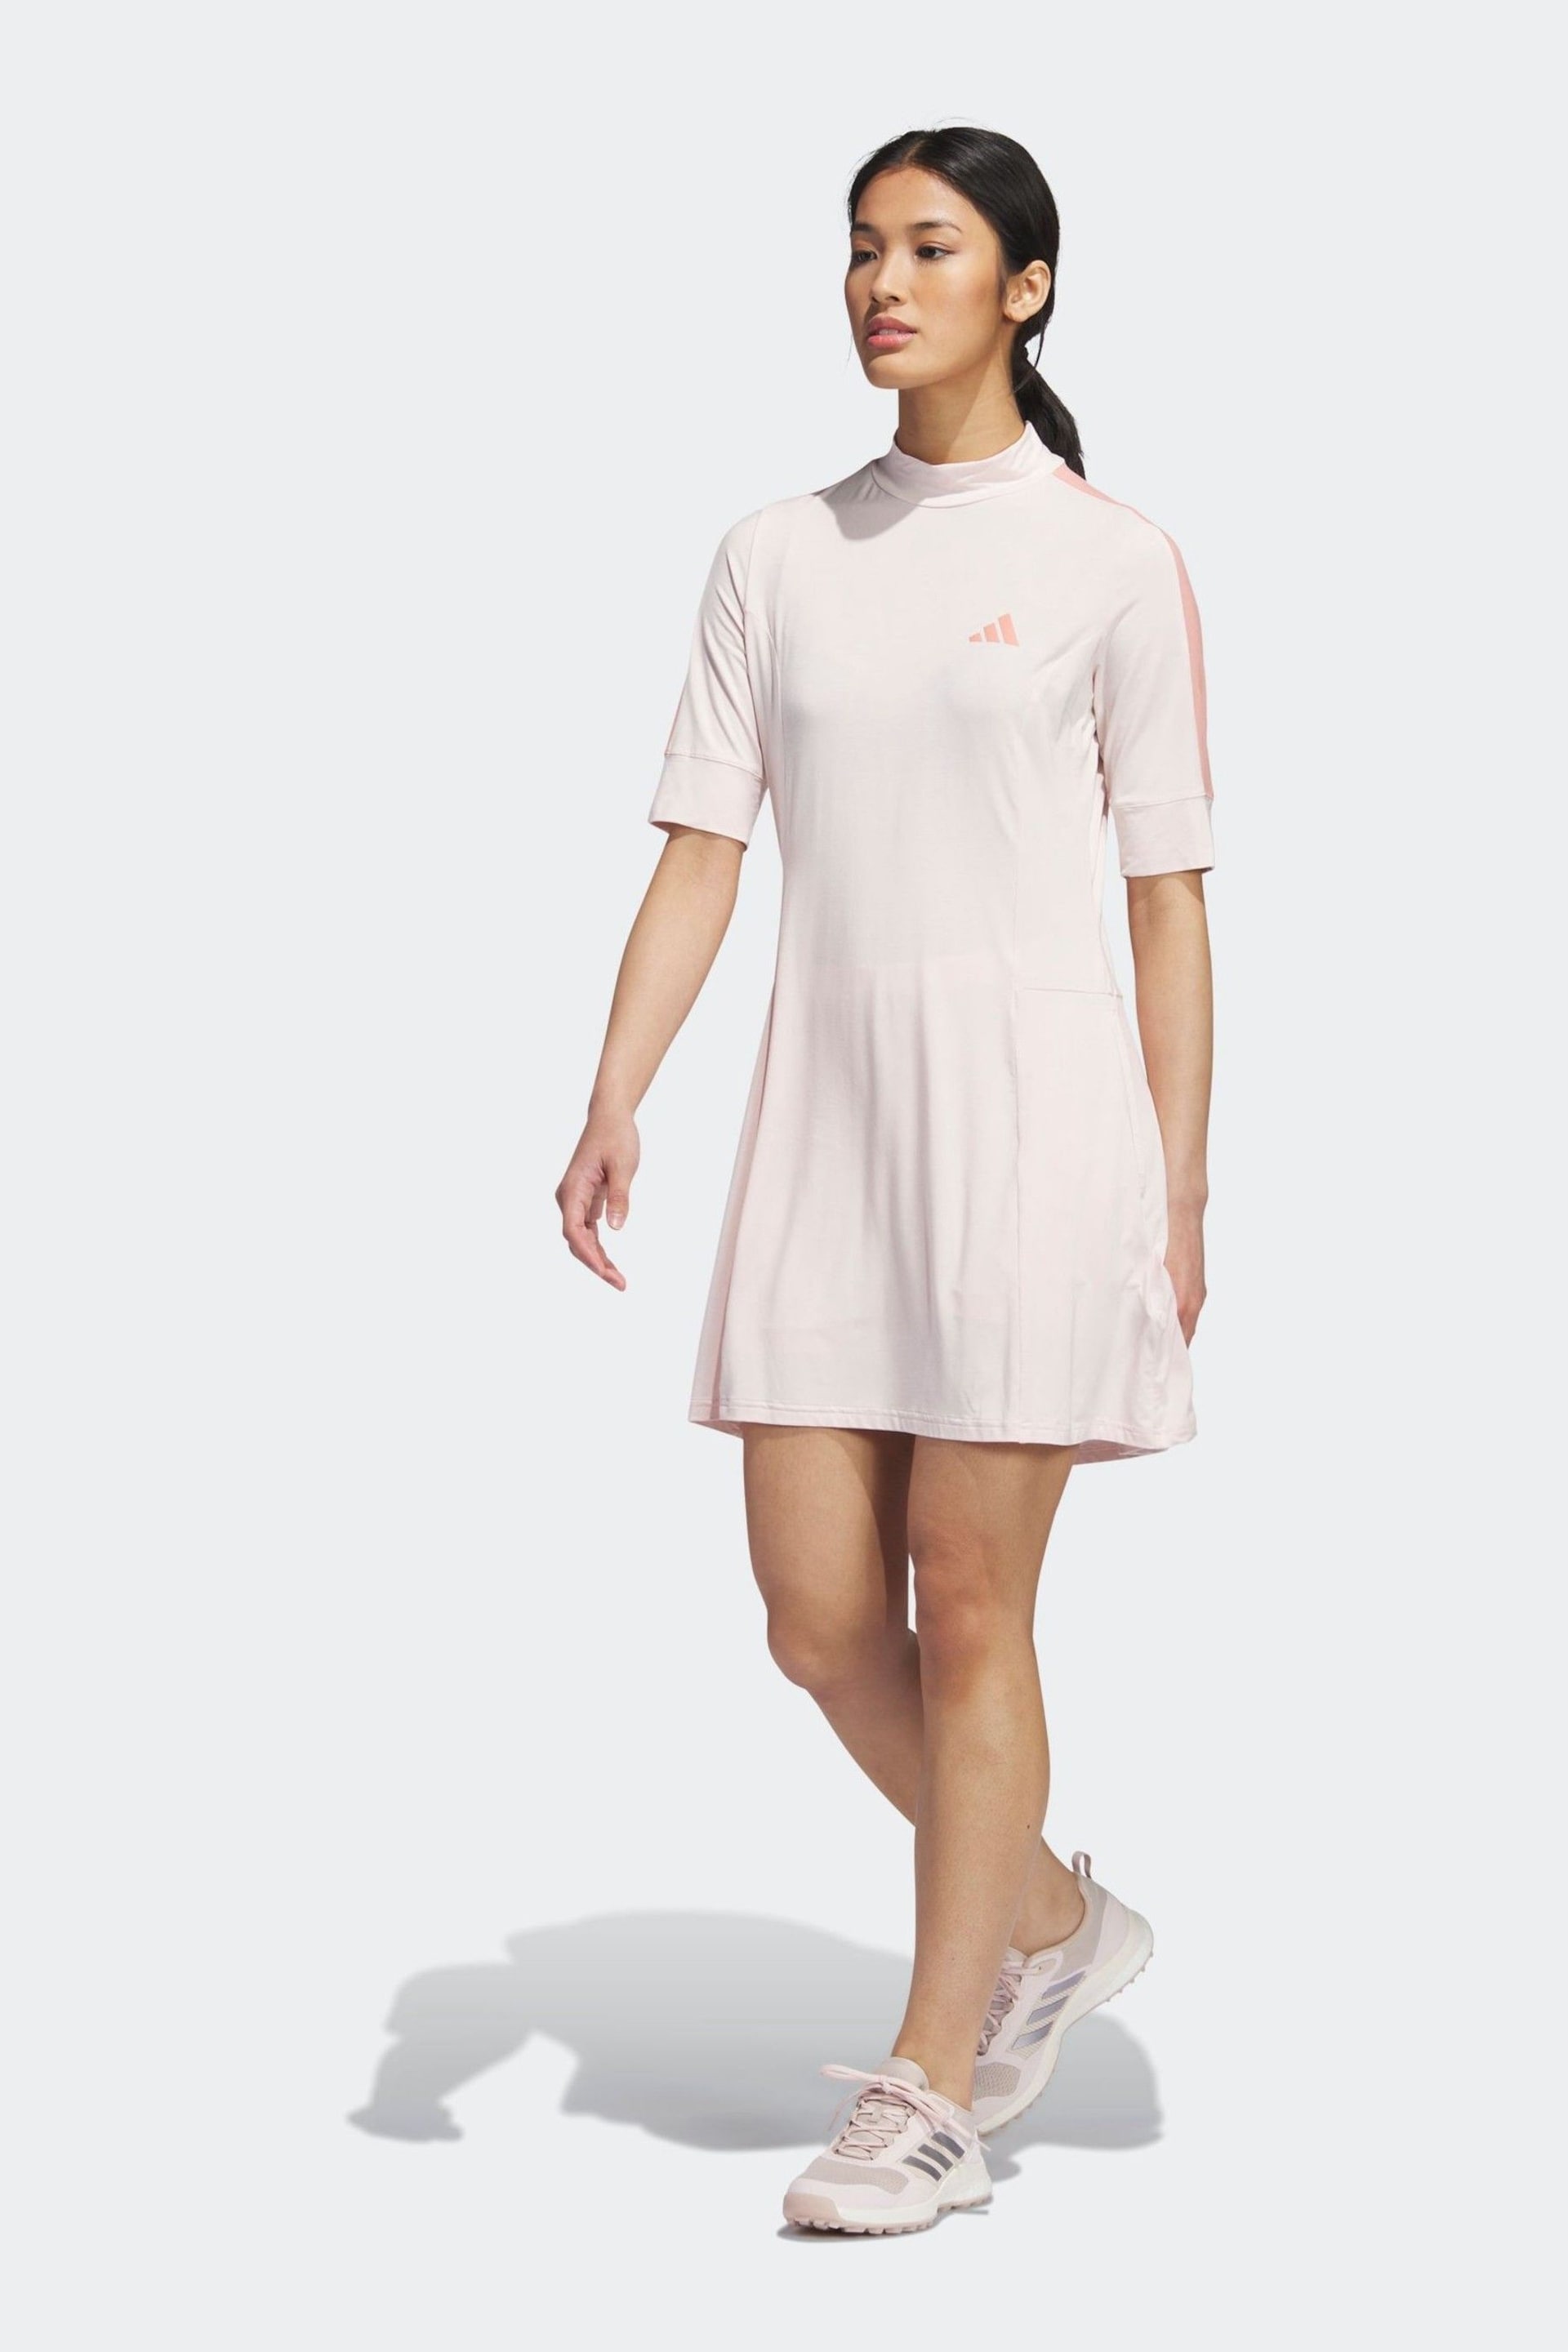 adidas Golf Made With Nature Dress - Image 1 of 7